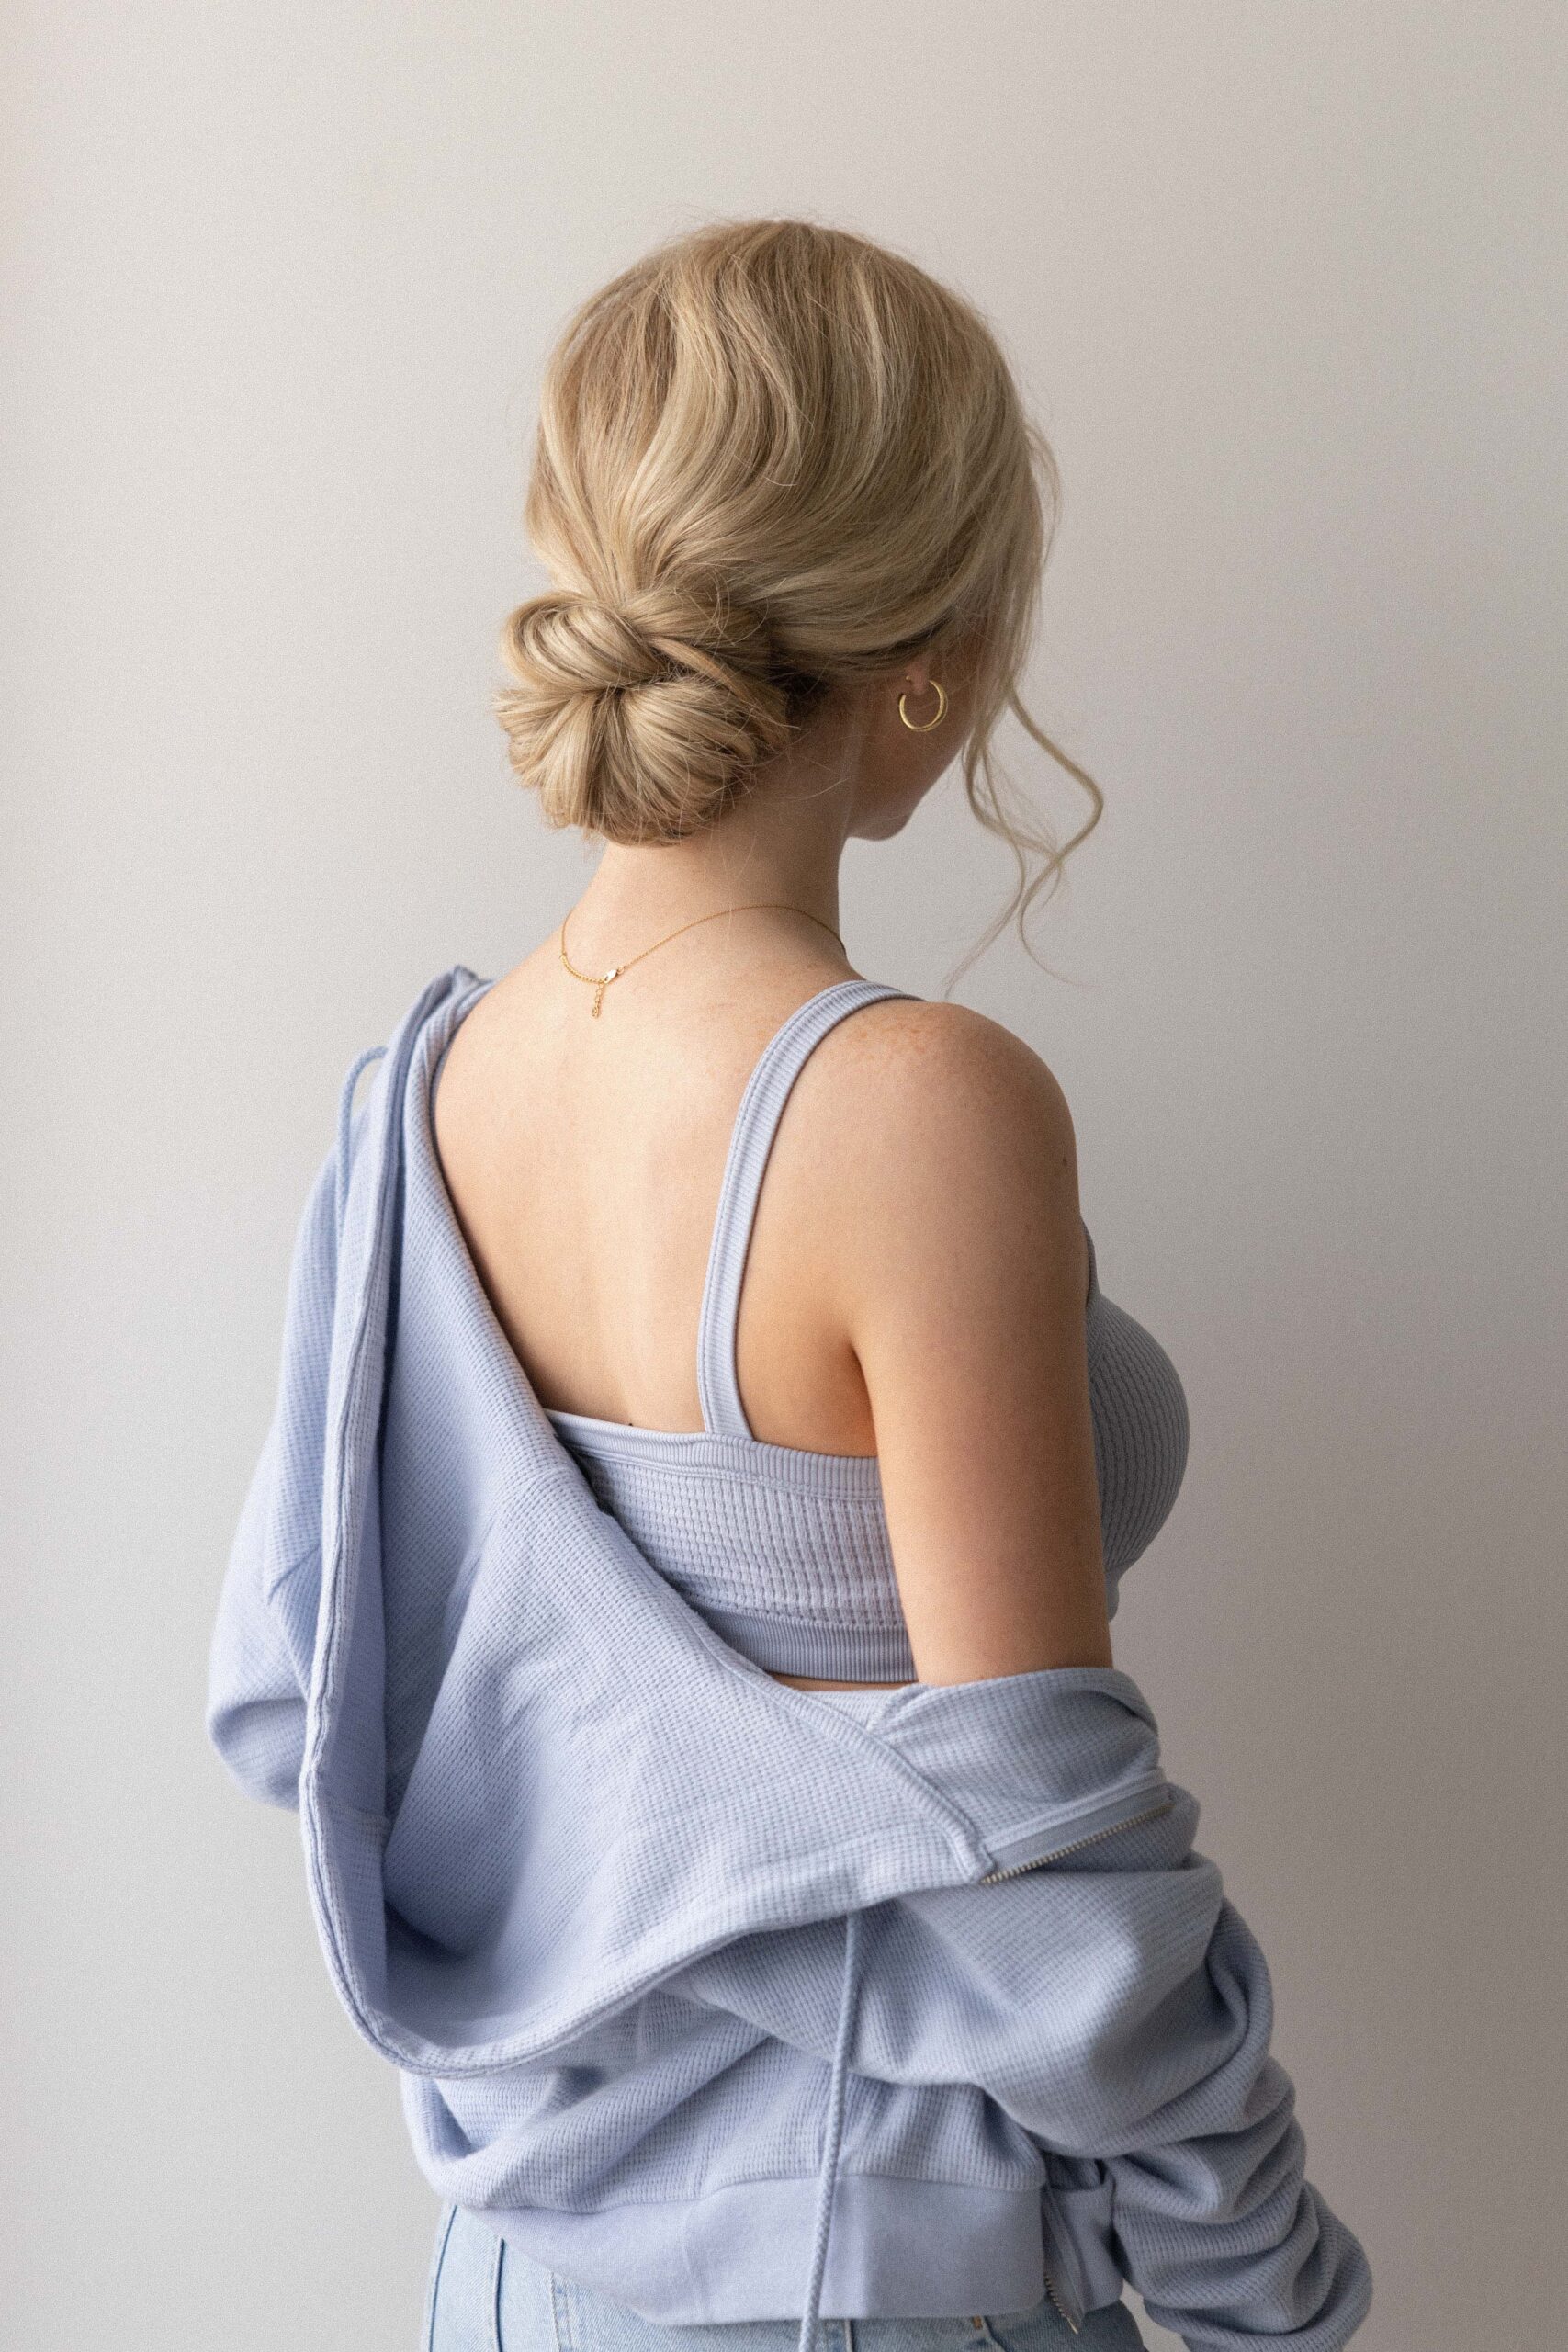 Top Tips for Perfecting the Hairstyle Bun